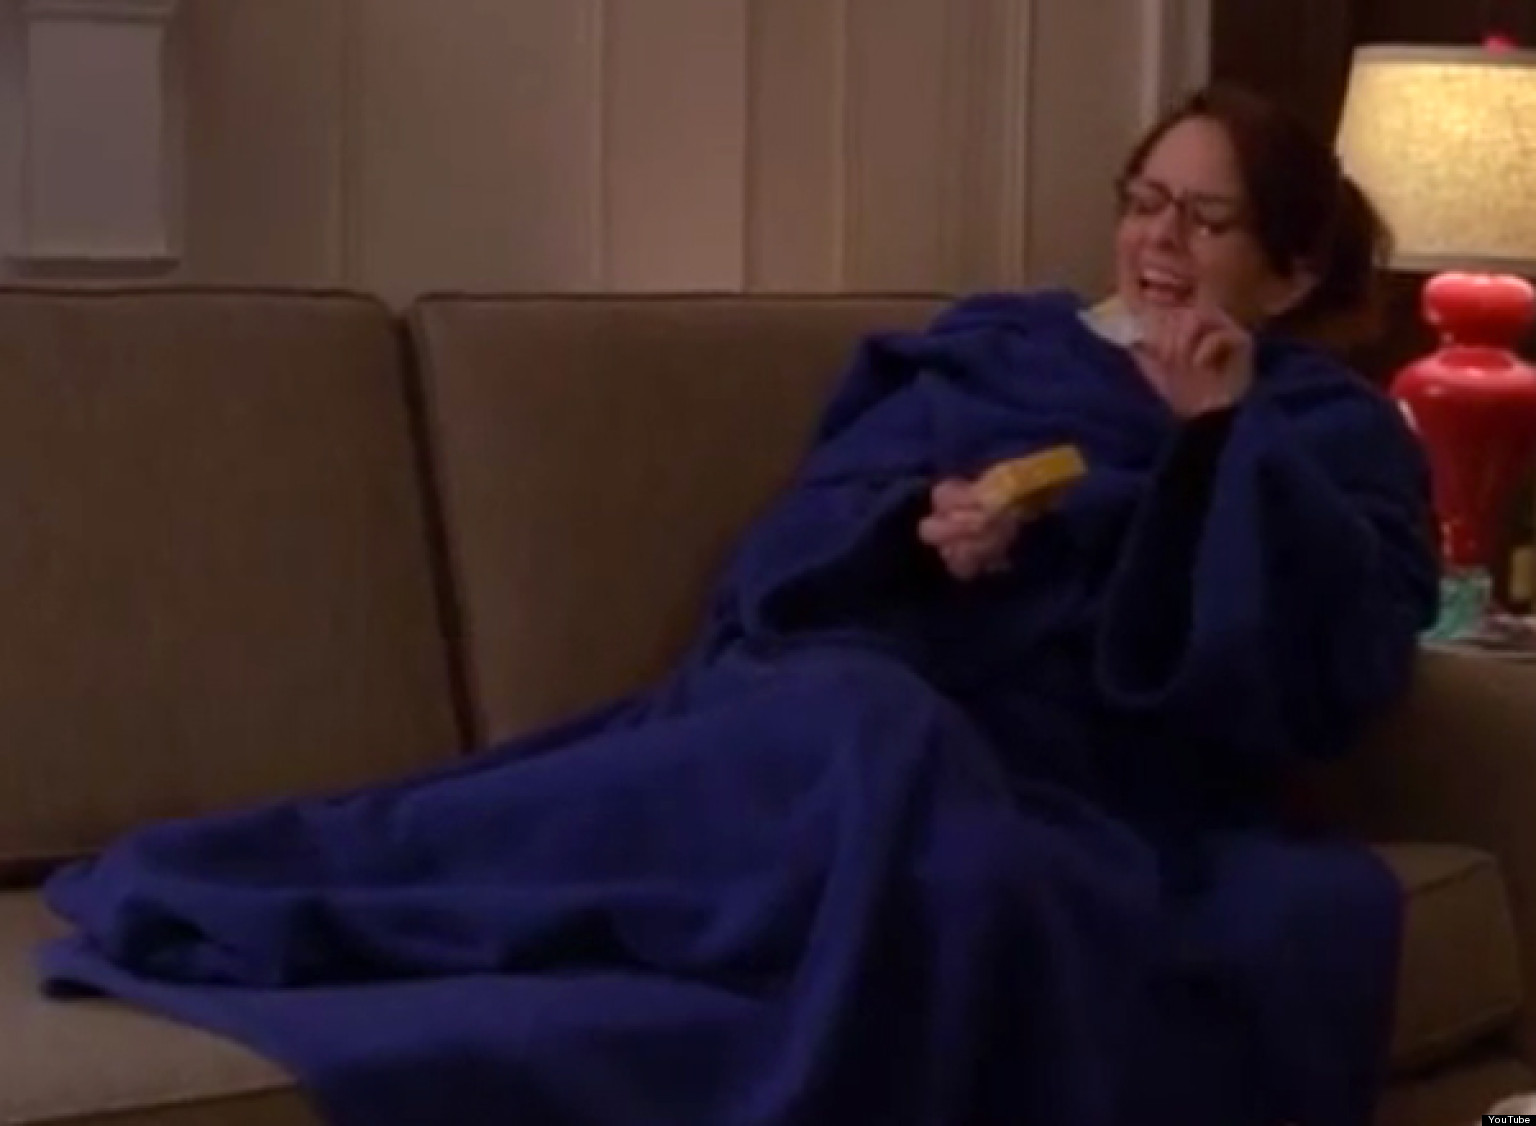 '30 Rock': 'Night Cheese' Song Caused Trouble With NBC | HuffPost